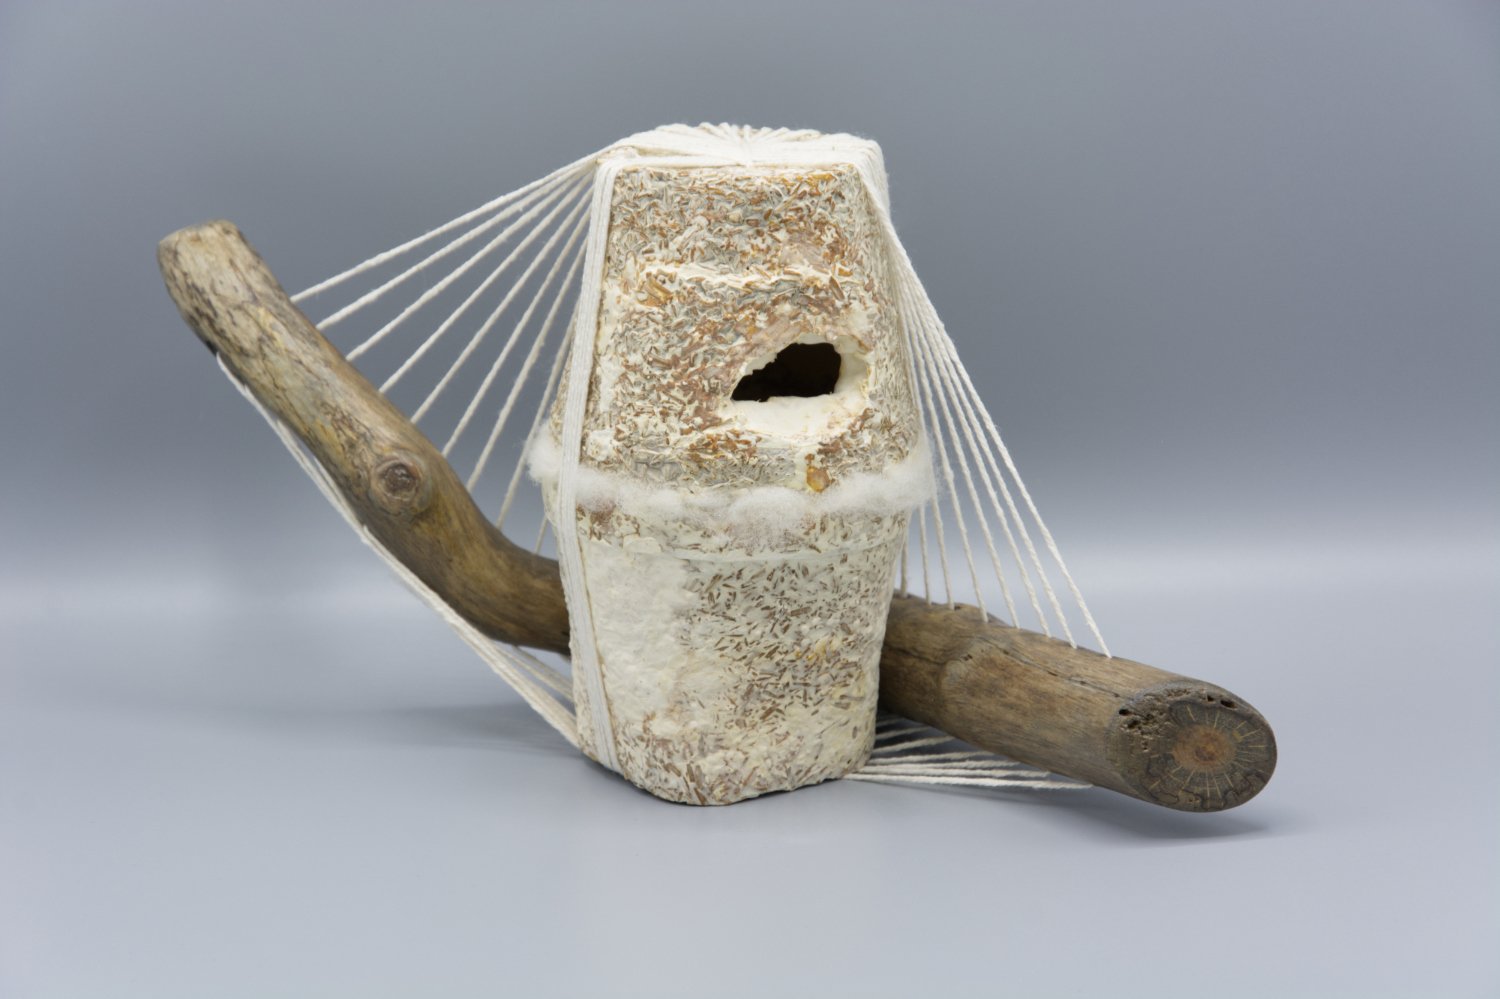  Kelly M O'Brien, As Well As Possible. Foraged wood, cast mycelium, wool, cotton cord. 5 x 12.5 x 6.5 inches. ©2023 